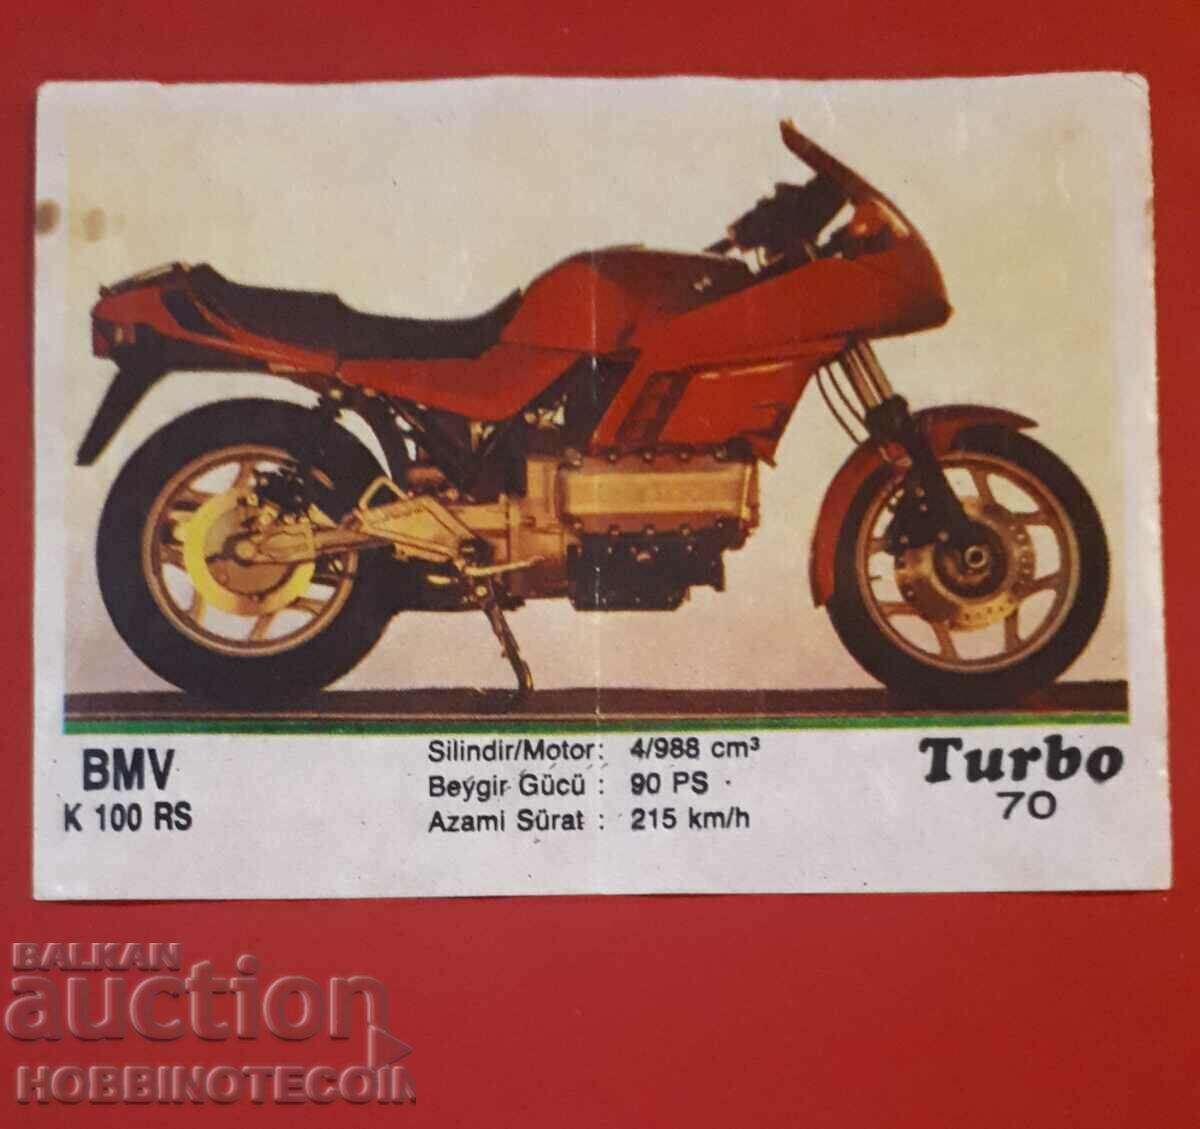 PICTURE TURBO TURBO N 70 BMW K 100 RS